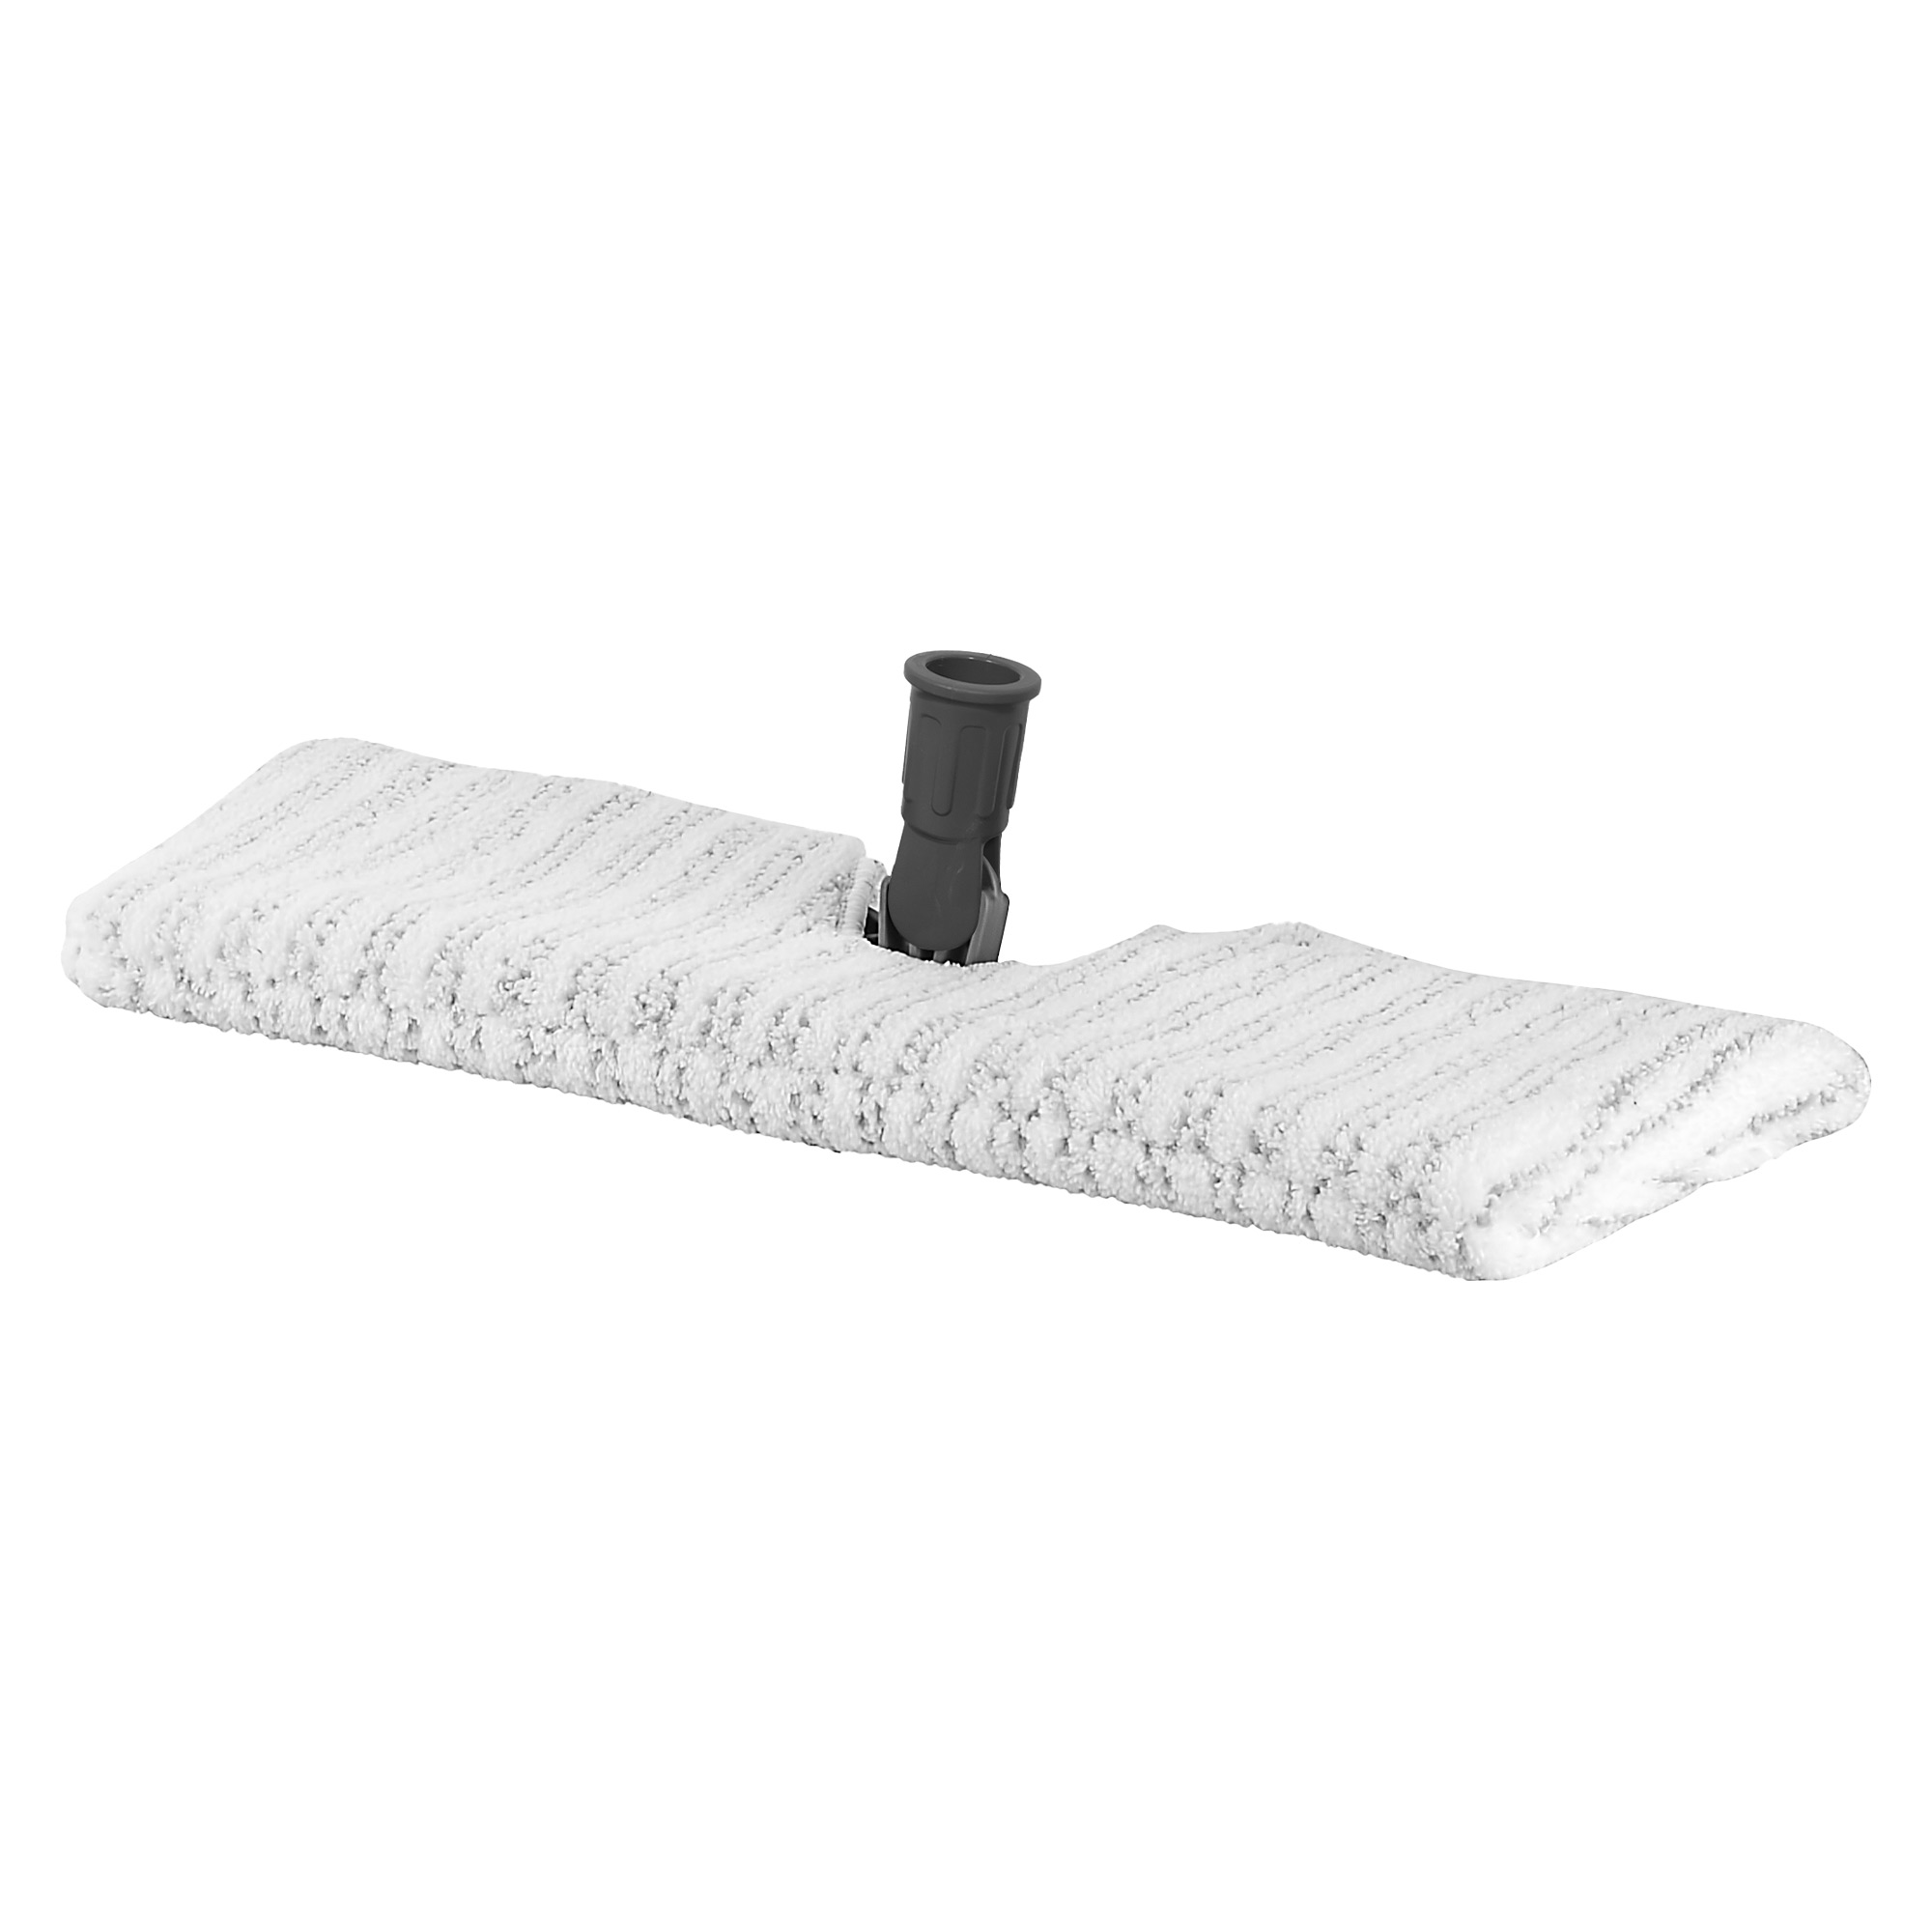 DUAL MOP CLEANING KIT